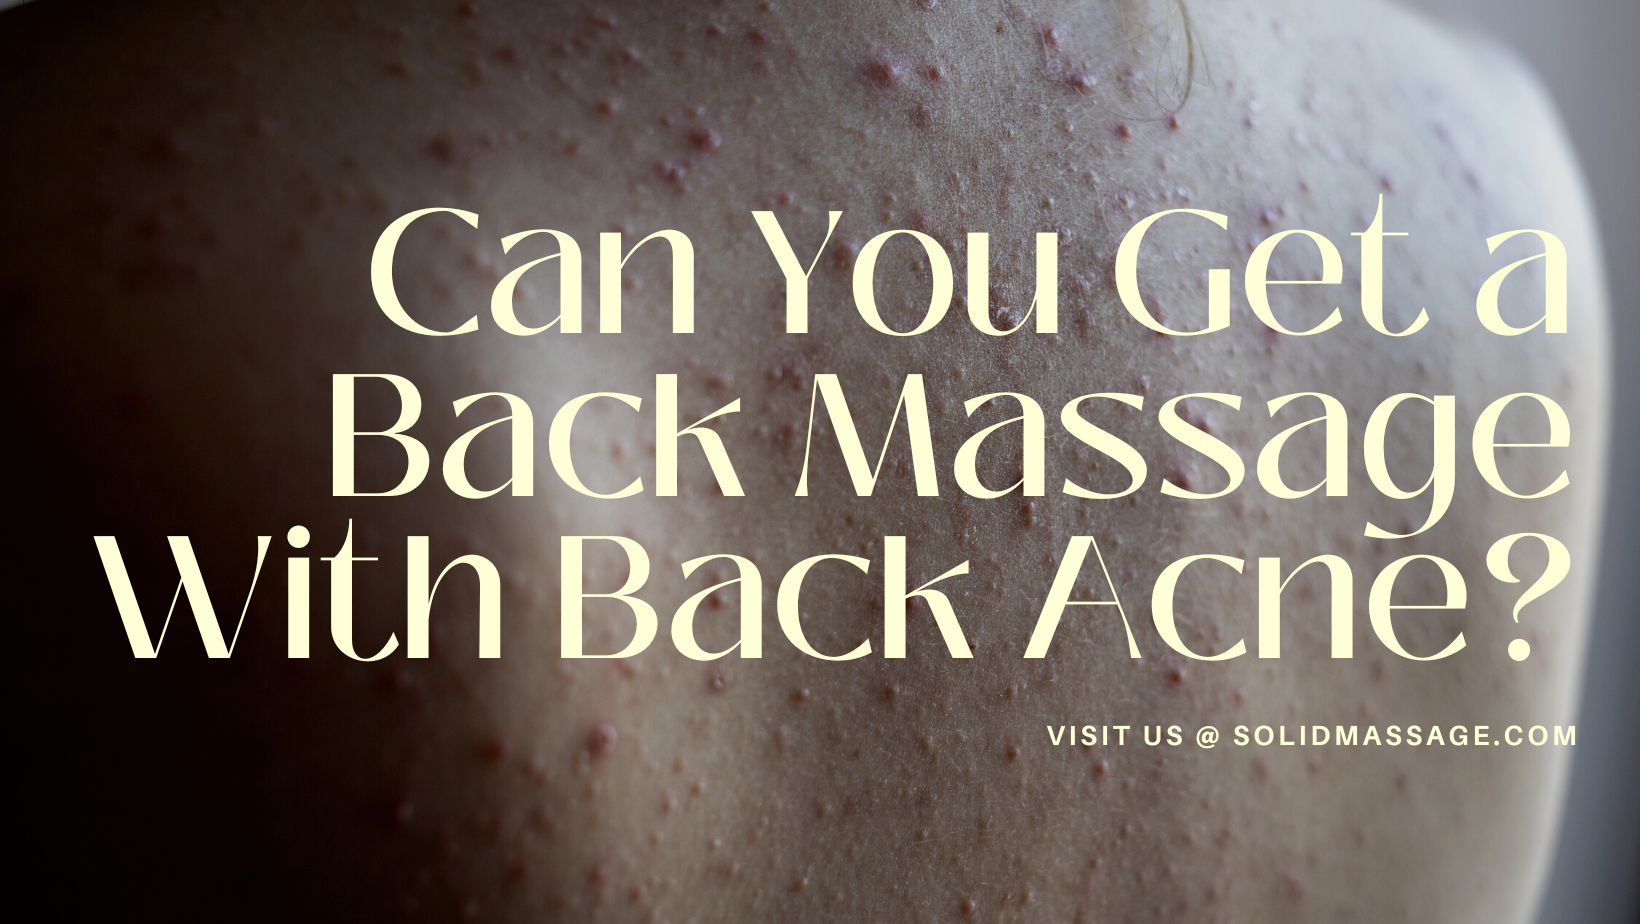 Can You Get a Back Massage With Back Acne